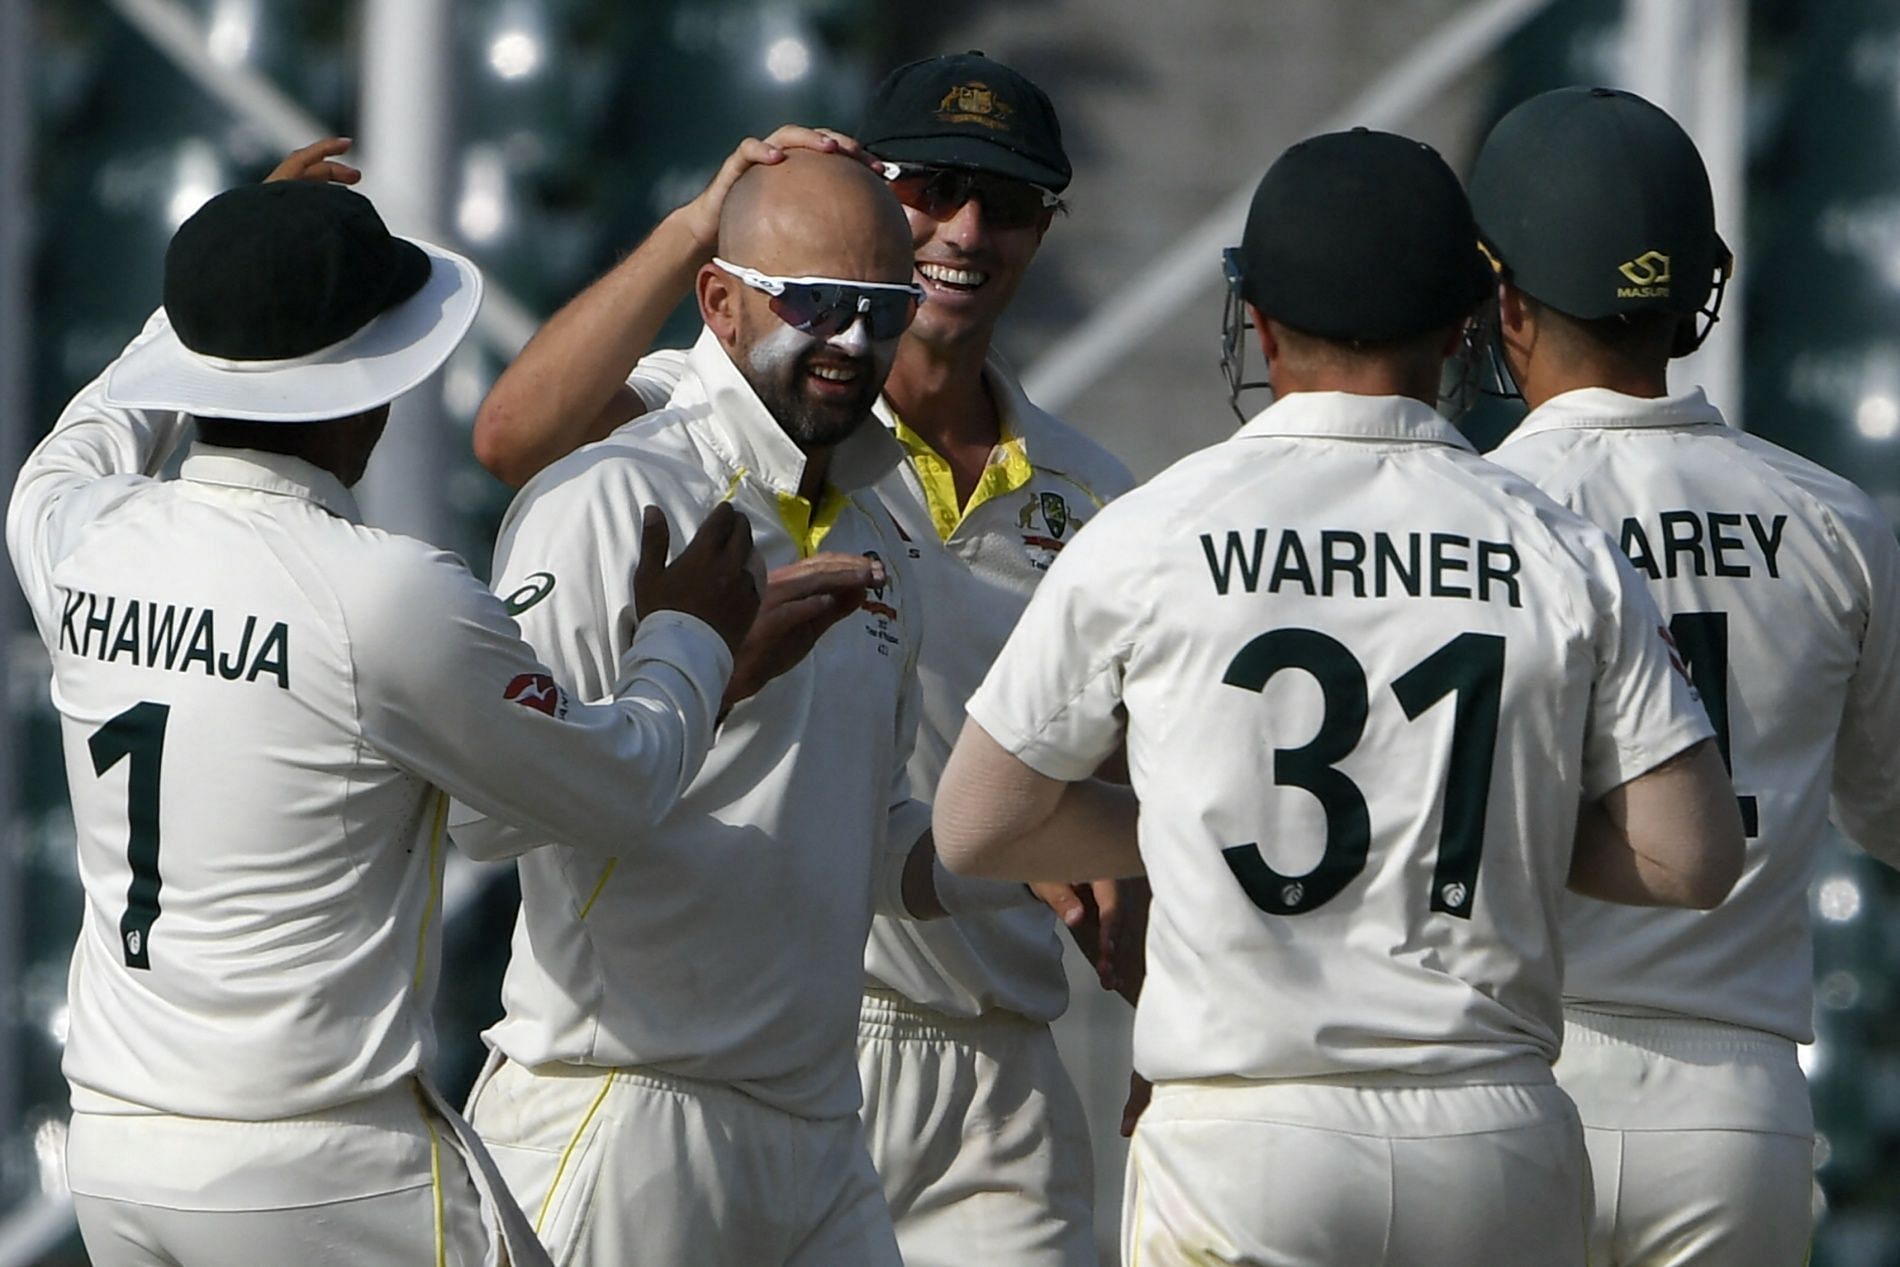 Nathan Lyon&#039;s five-fer bowled Australia to a famous win in Lahore. Pic: ICC